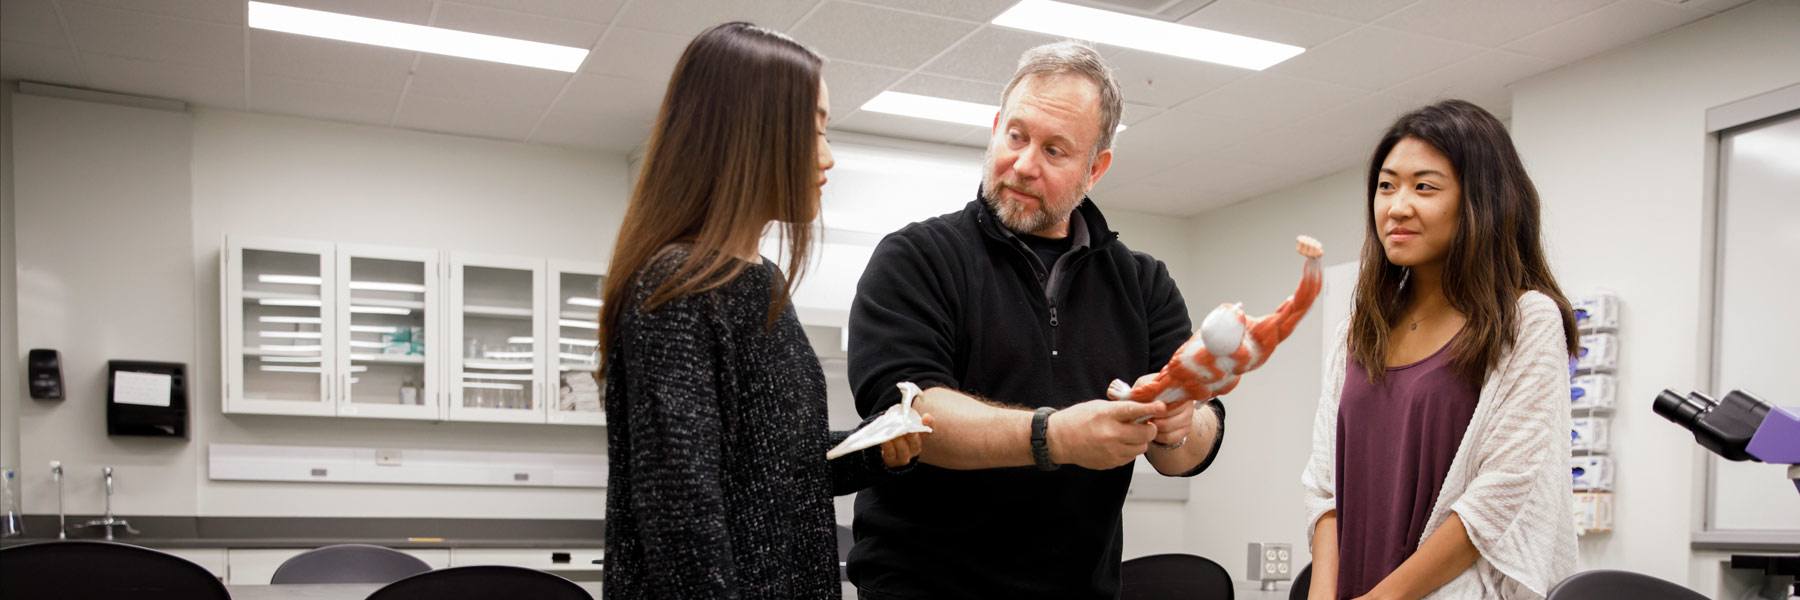 A professor shows a small model of human muscles to two students.